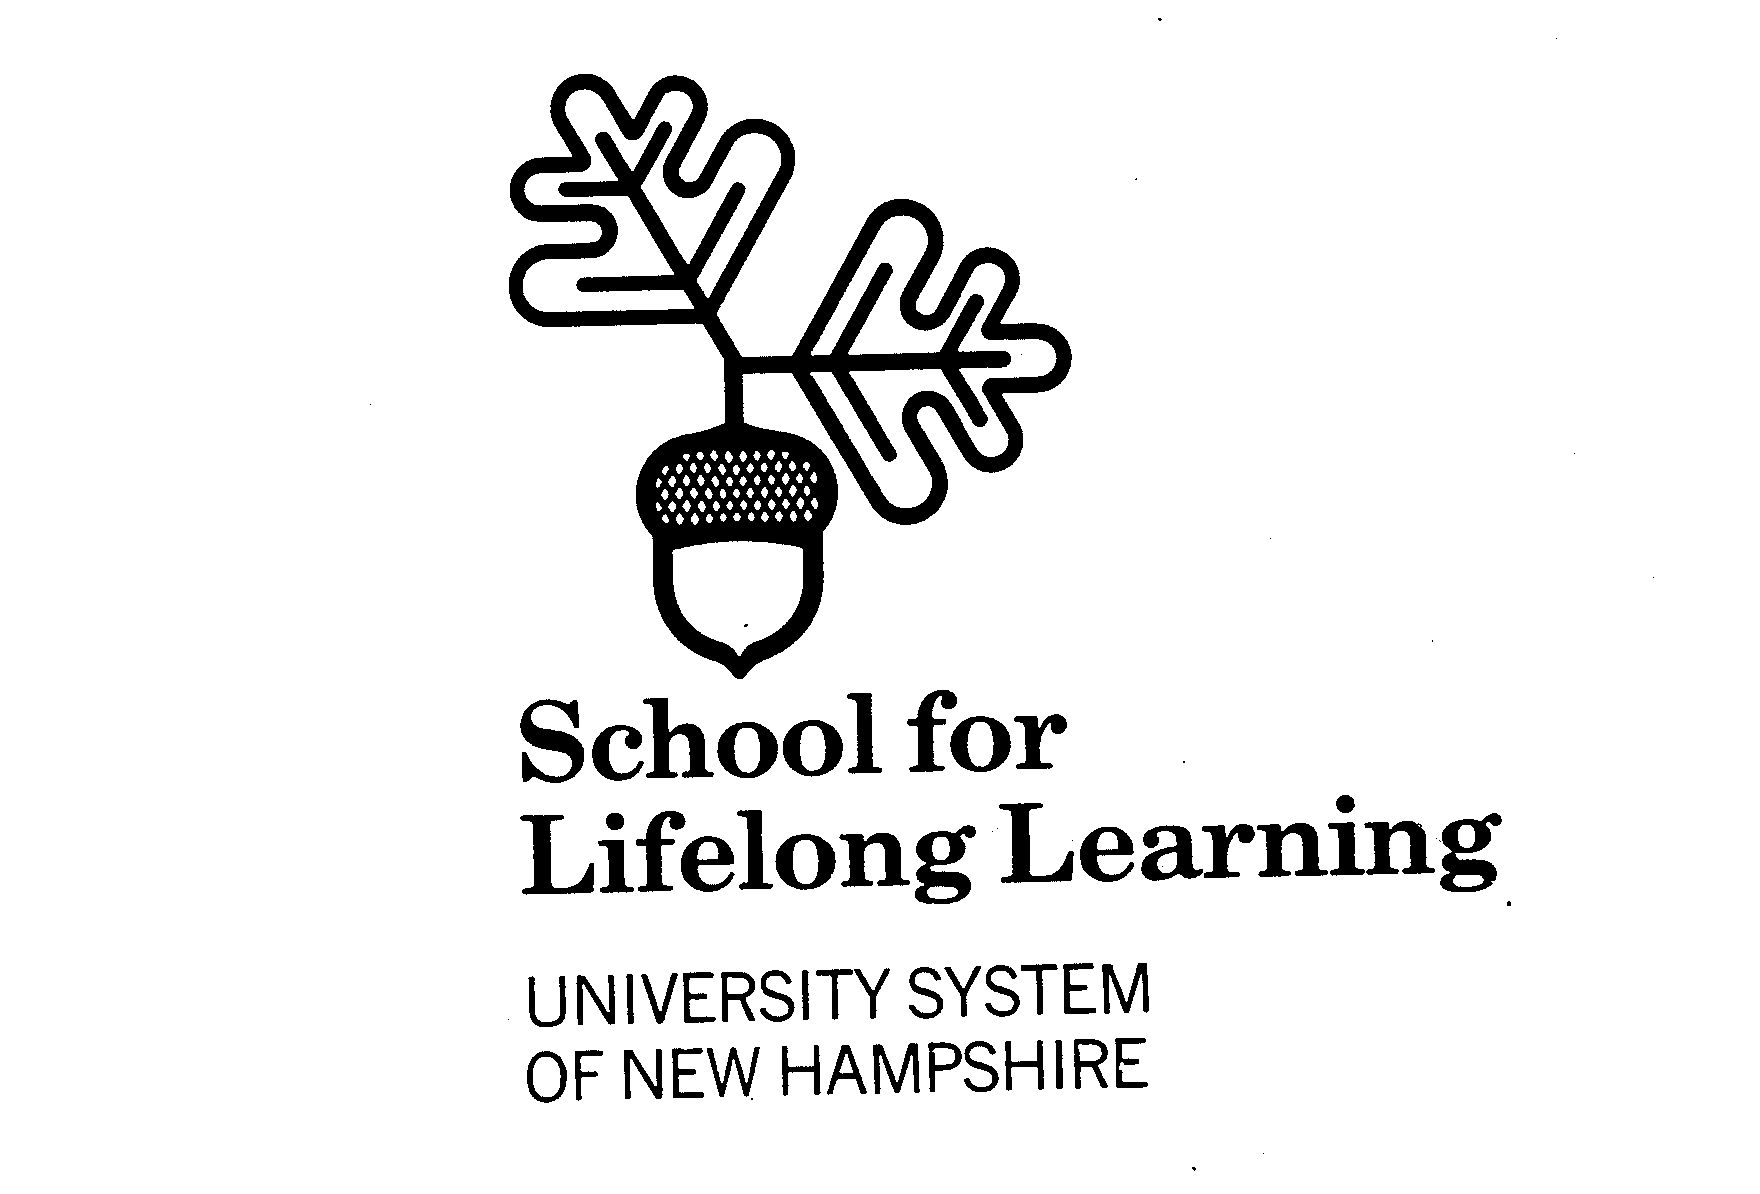  SCHOOL FOR LIFELONG LEARNING UNIVERSITY SYSTEM OF NEW HAMPSHIRE